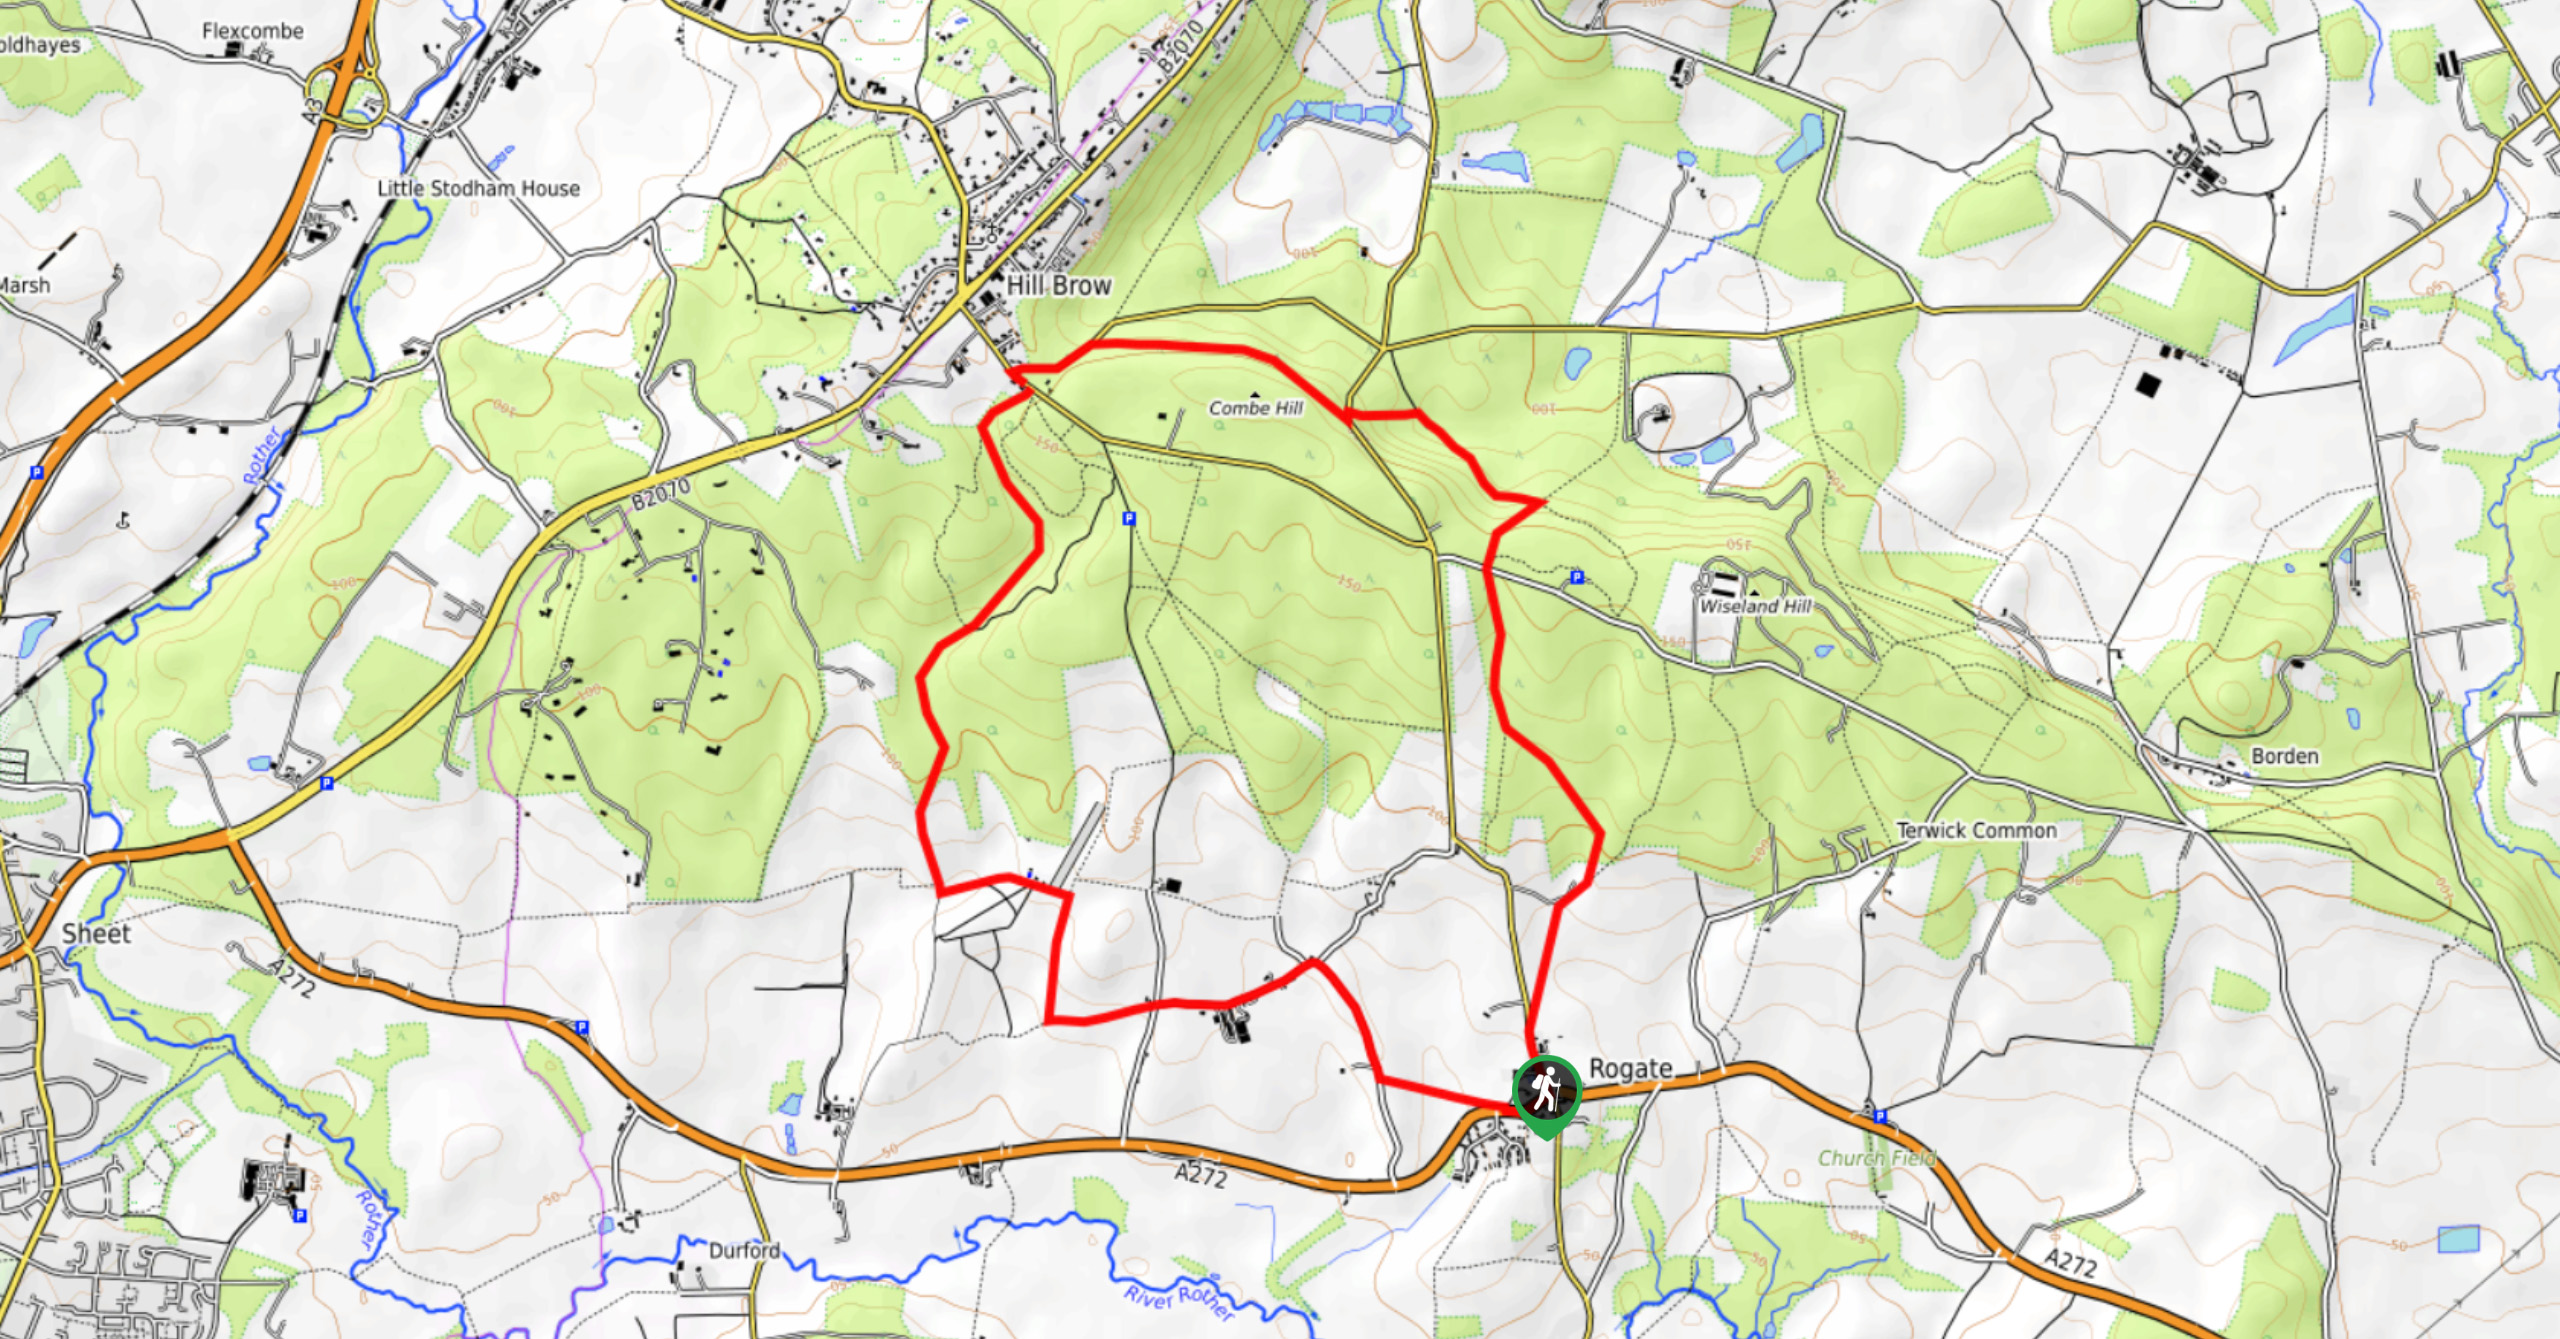 South Downs National Park-Durford Wood Walk-Map image